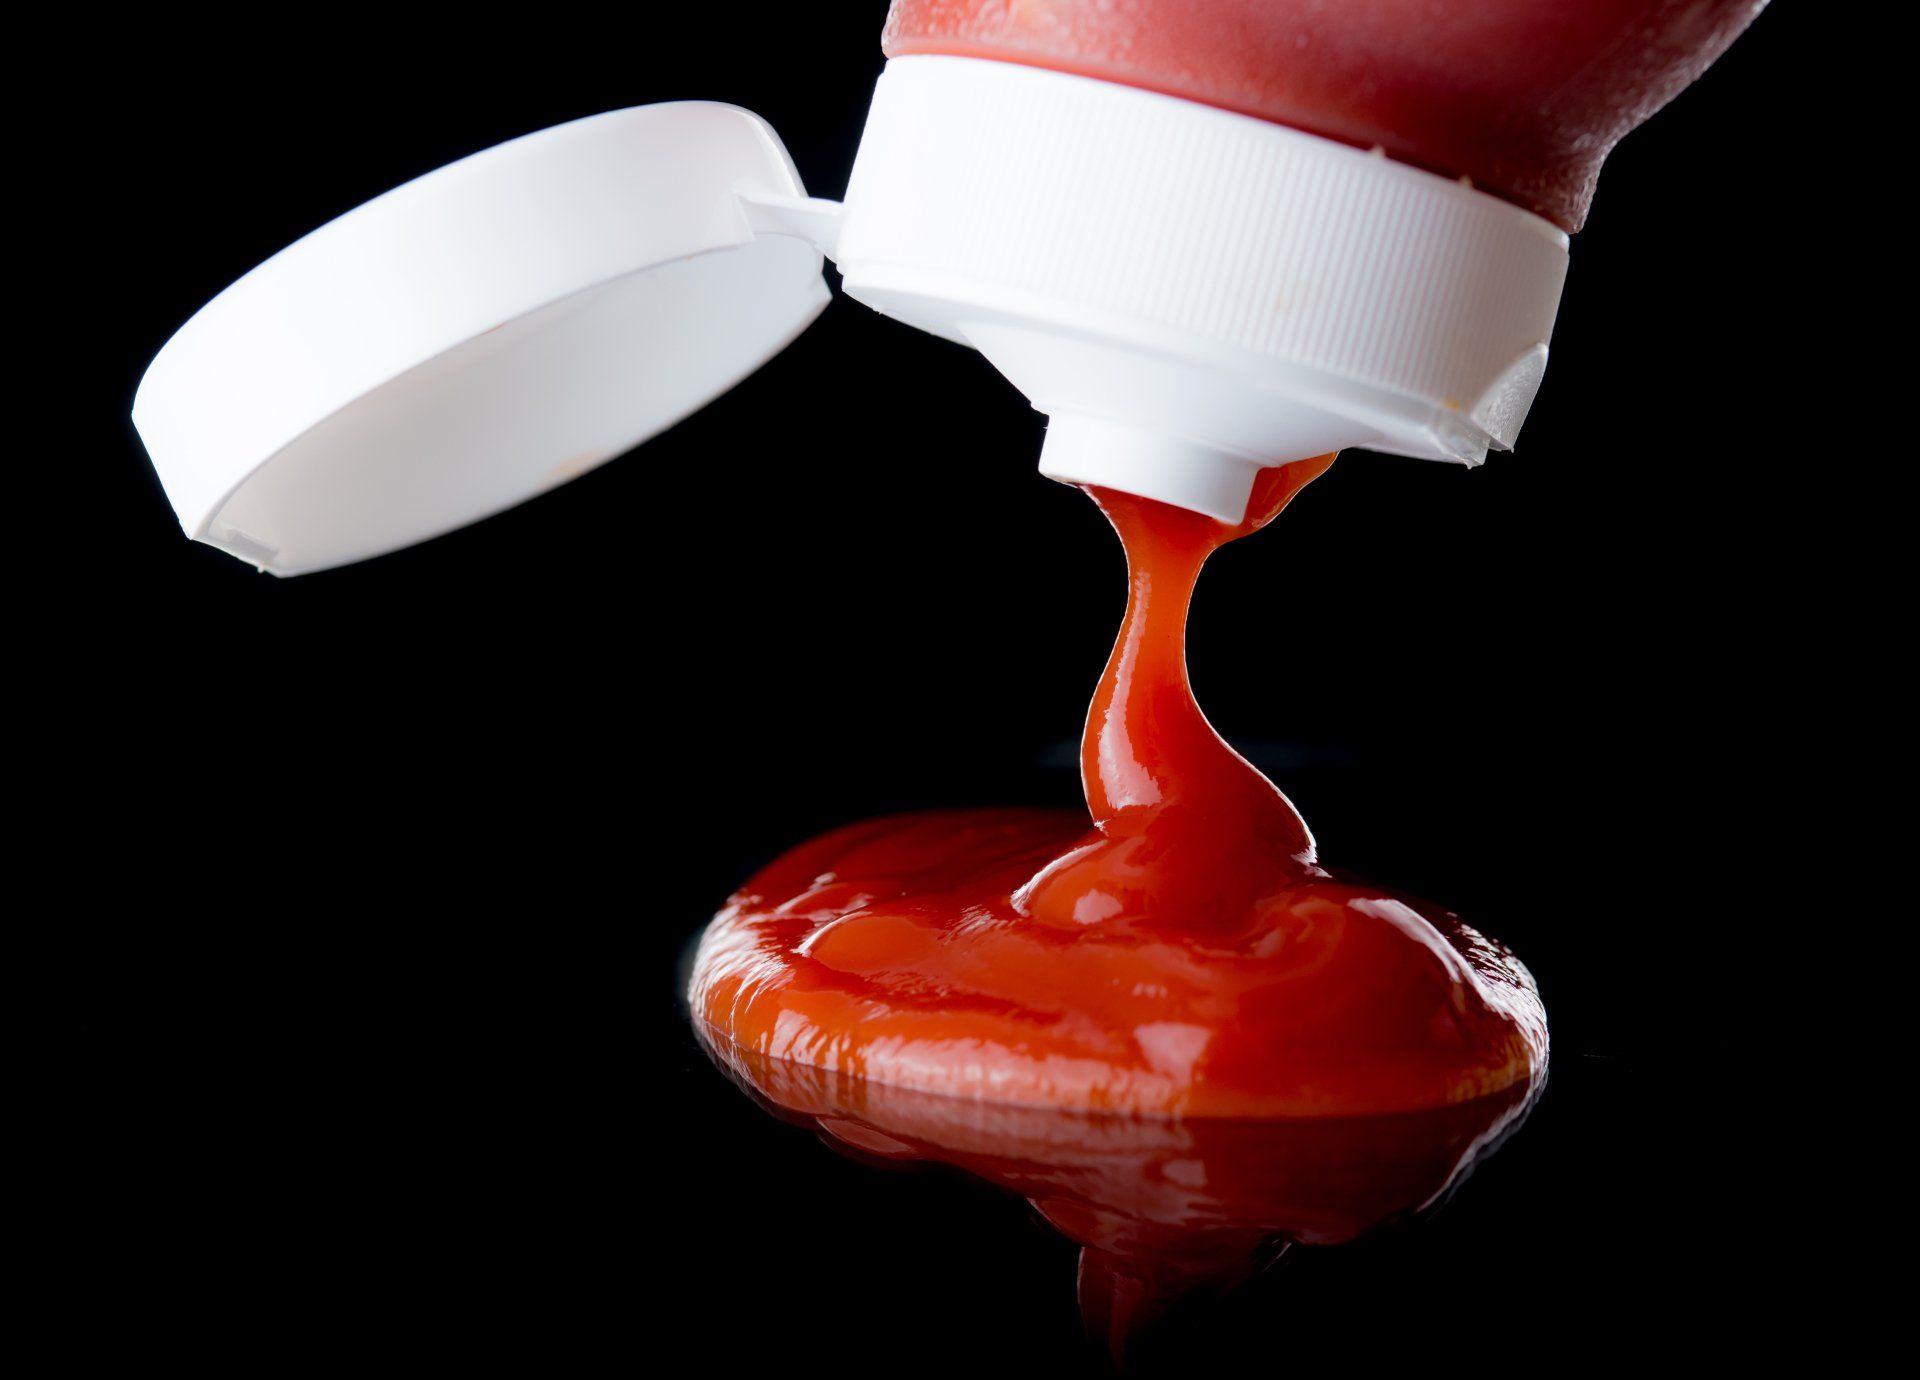 ketchup is being poured from a bottle on a black background